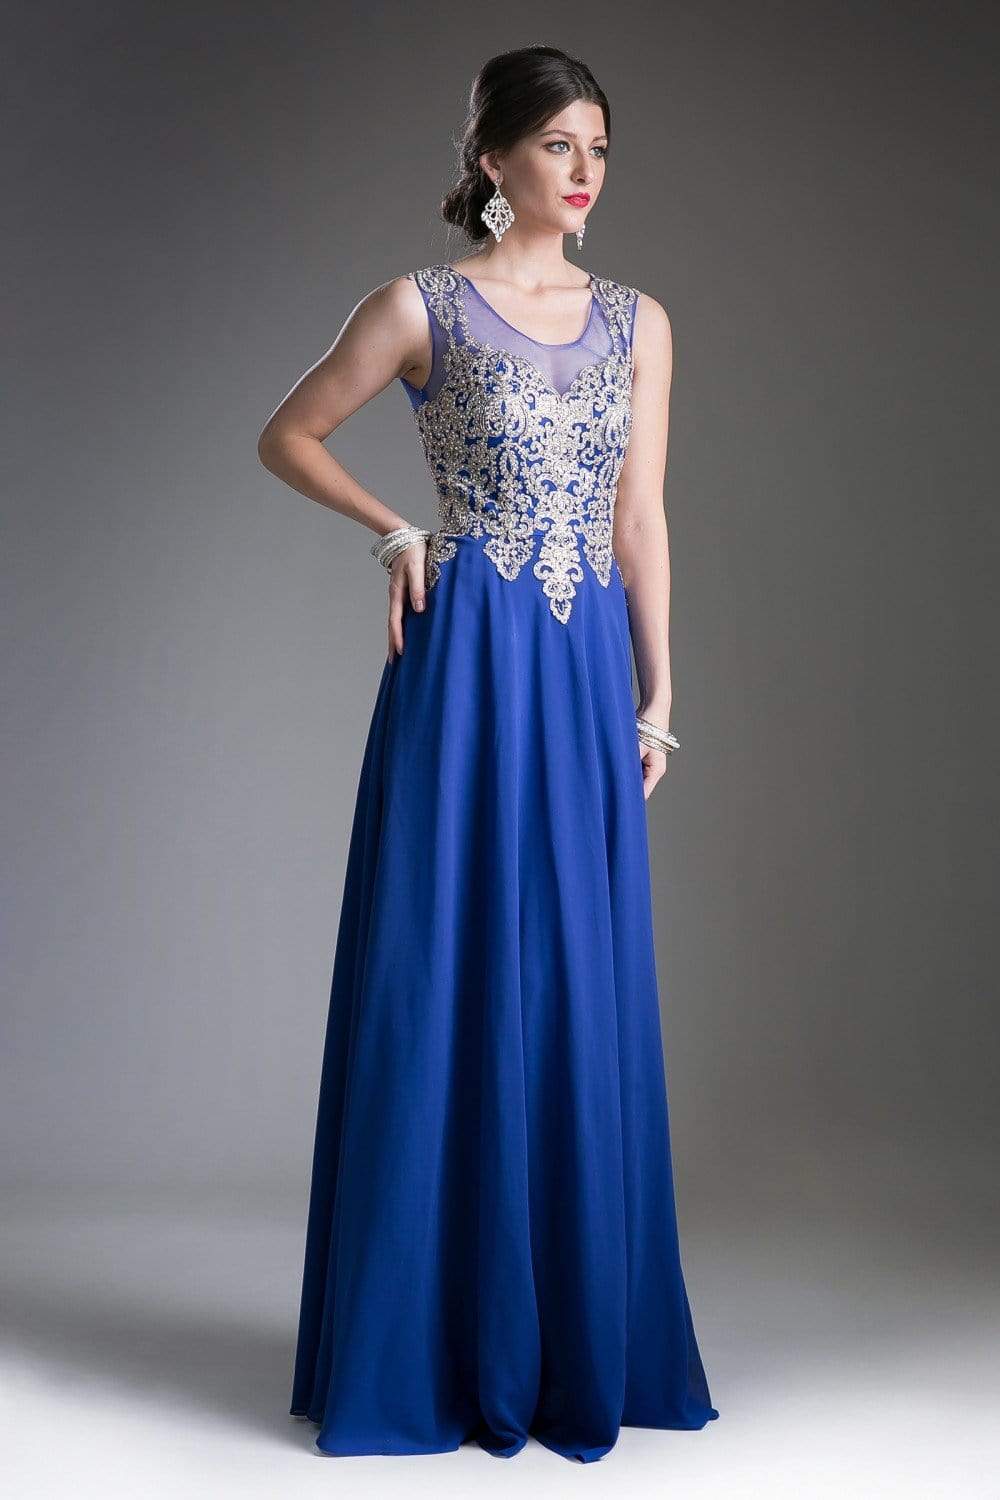 Cinderella Divine - Jeweled Metallic Lace Illusion A-Line Evening Gown ...